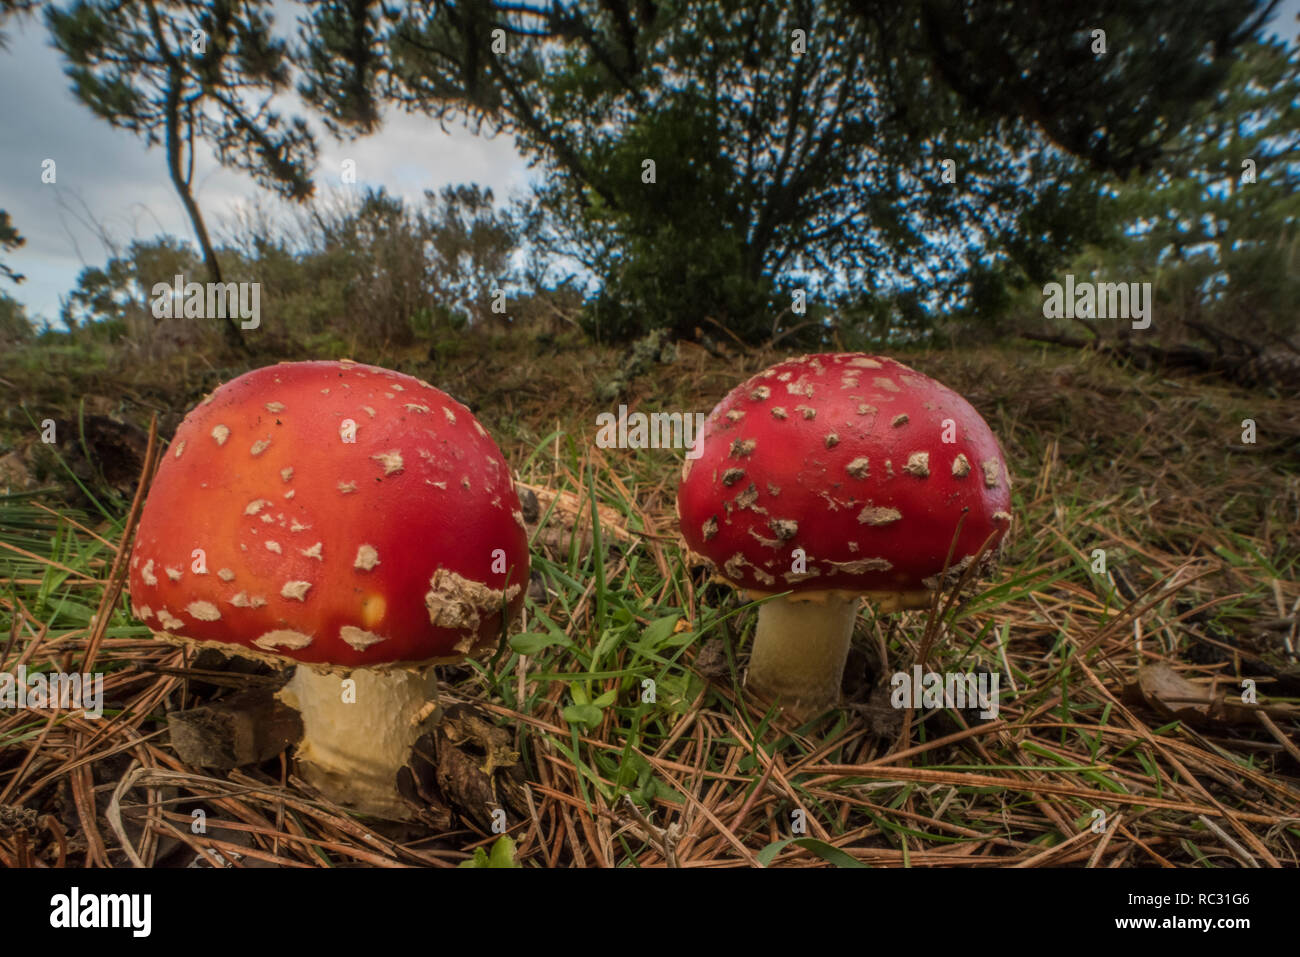 Fly agaric mushrooms (Amanita muscaria) a poisonous toadstool species found across much of the world. Growing wild in a regional park in California. Stock Photo